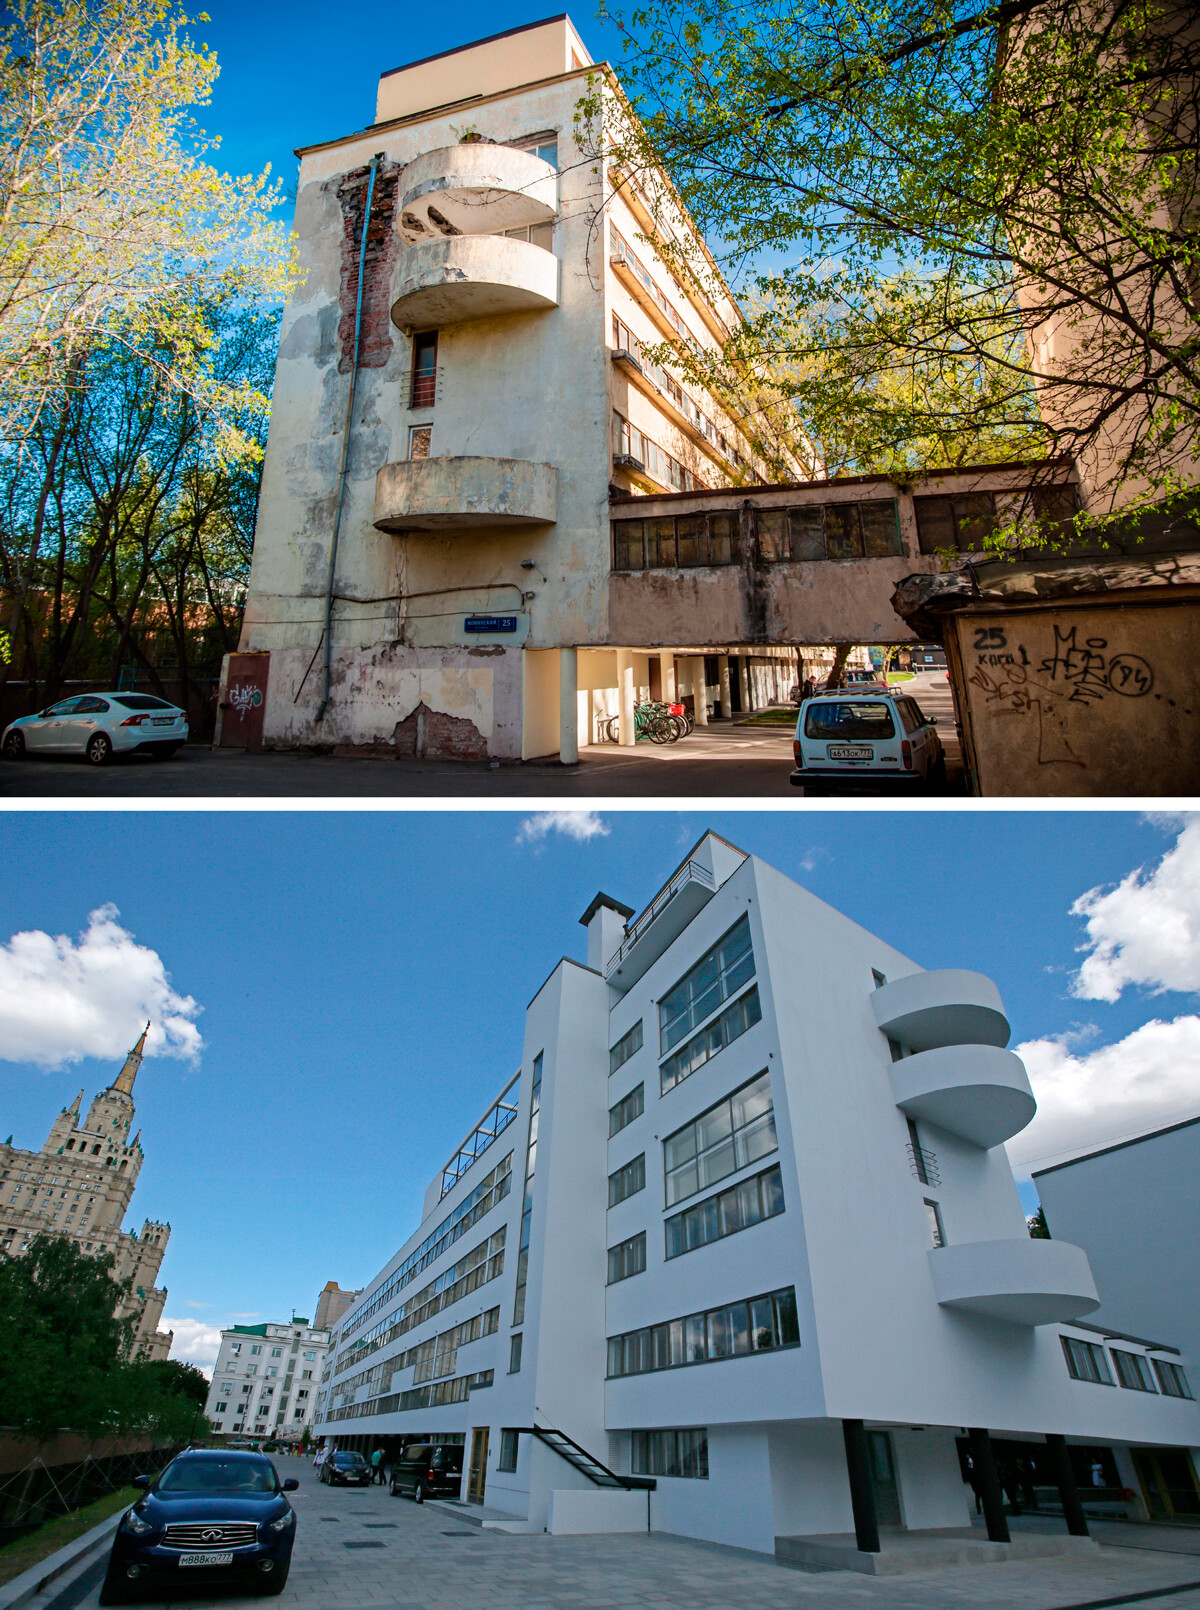 The Narkomfin Building, before and after the restoration